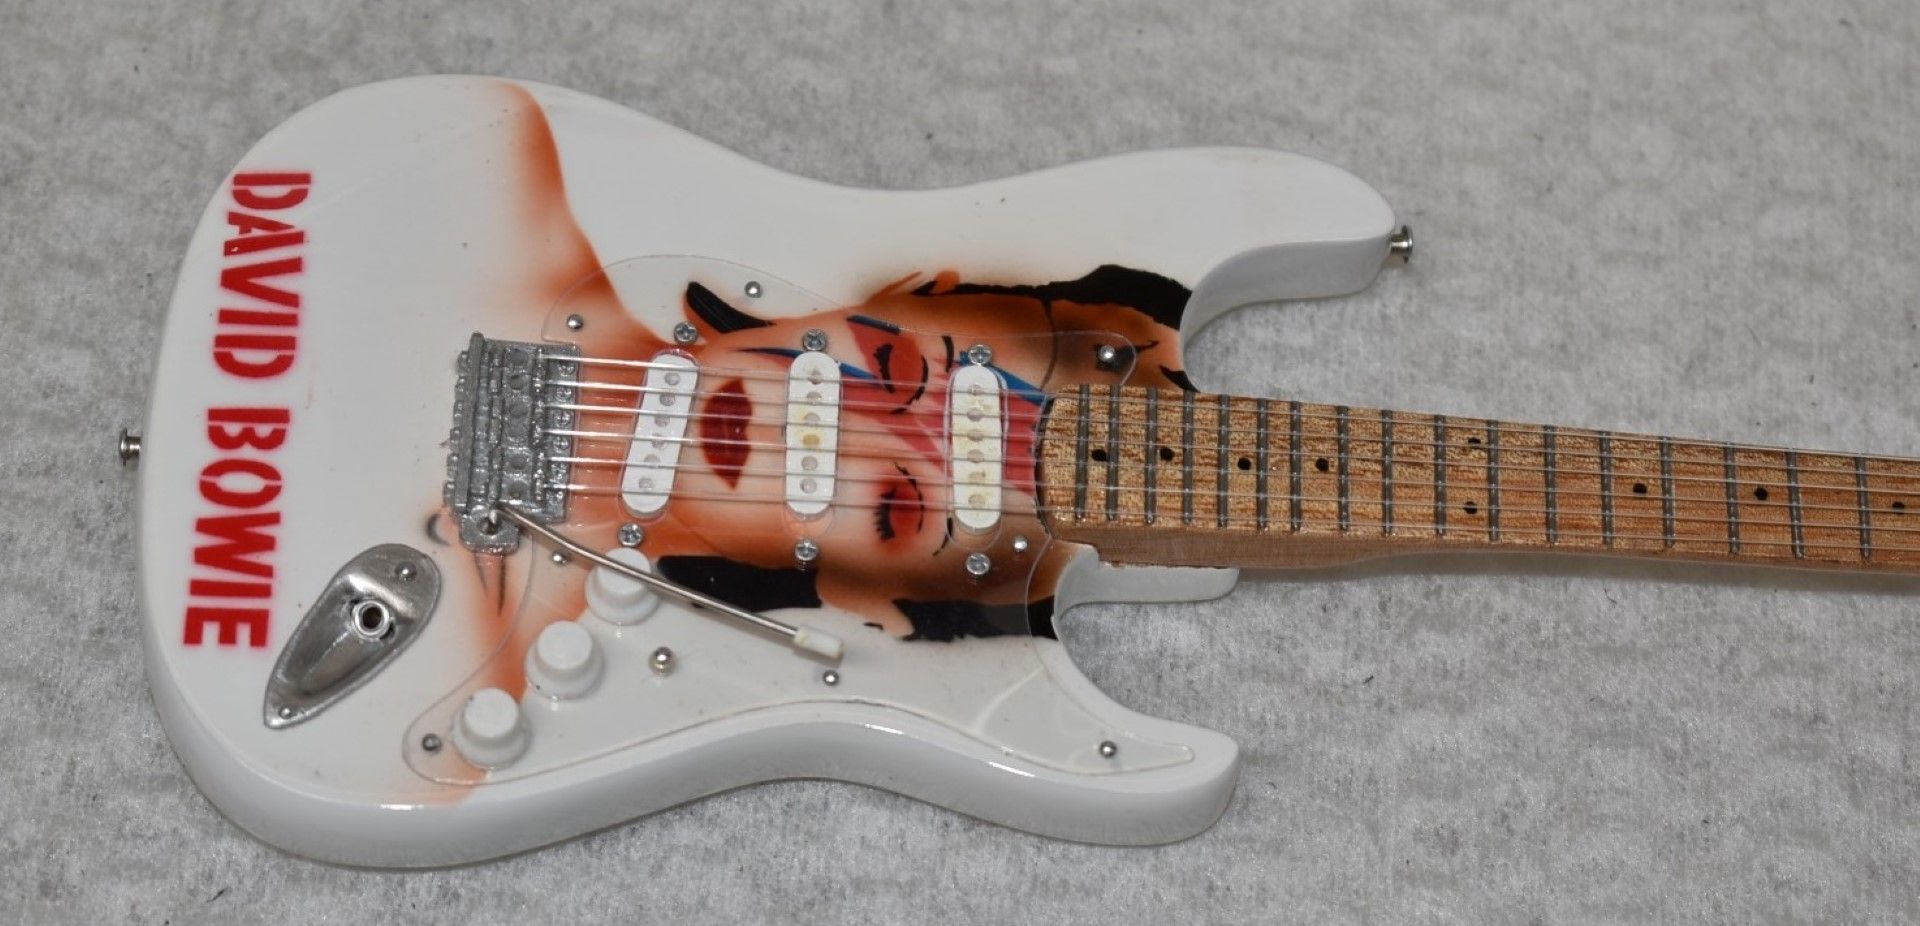 1 x Miniature Hand Made Guitar - David Bowie Fender Stratocaster - New & Unused - RRP £35 - Image 4 of 5